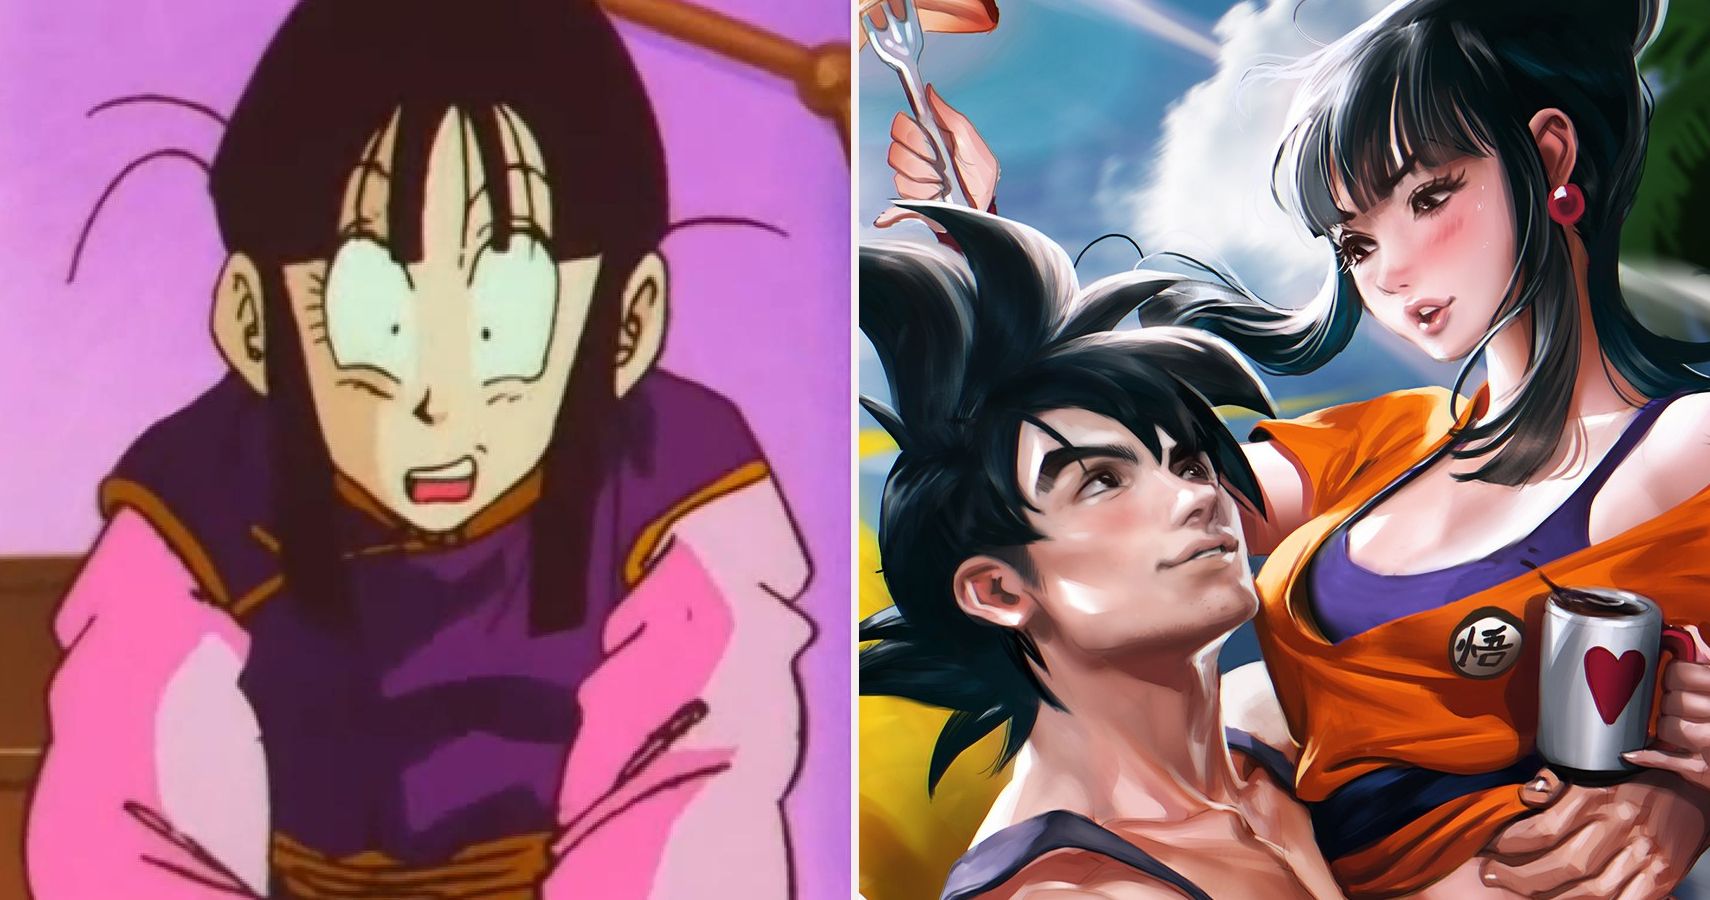 Dragon Ball Main Characters' Name Meanings